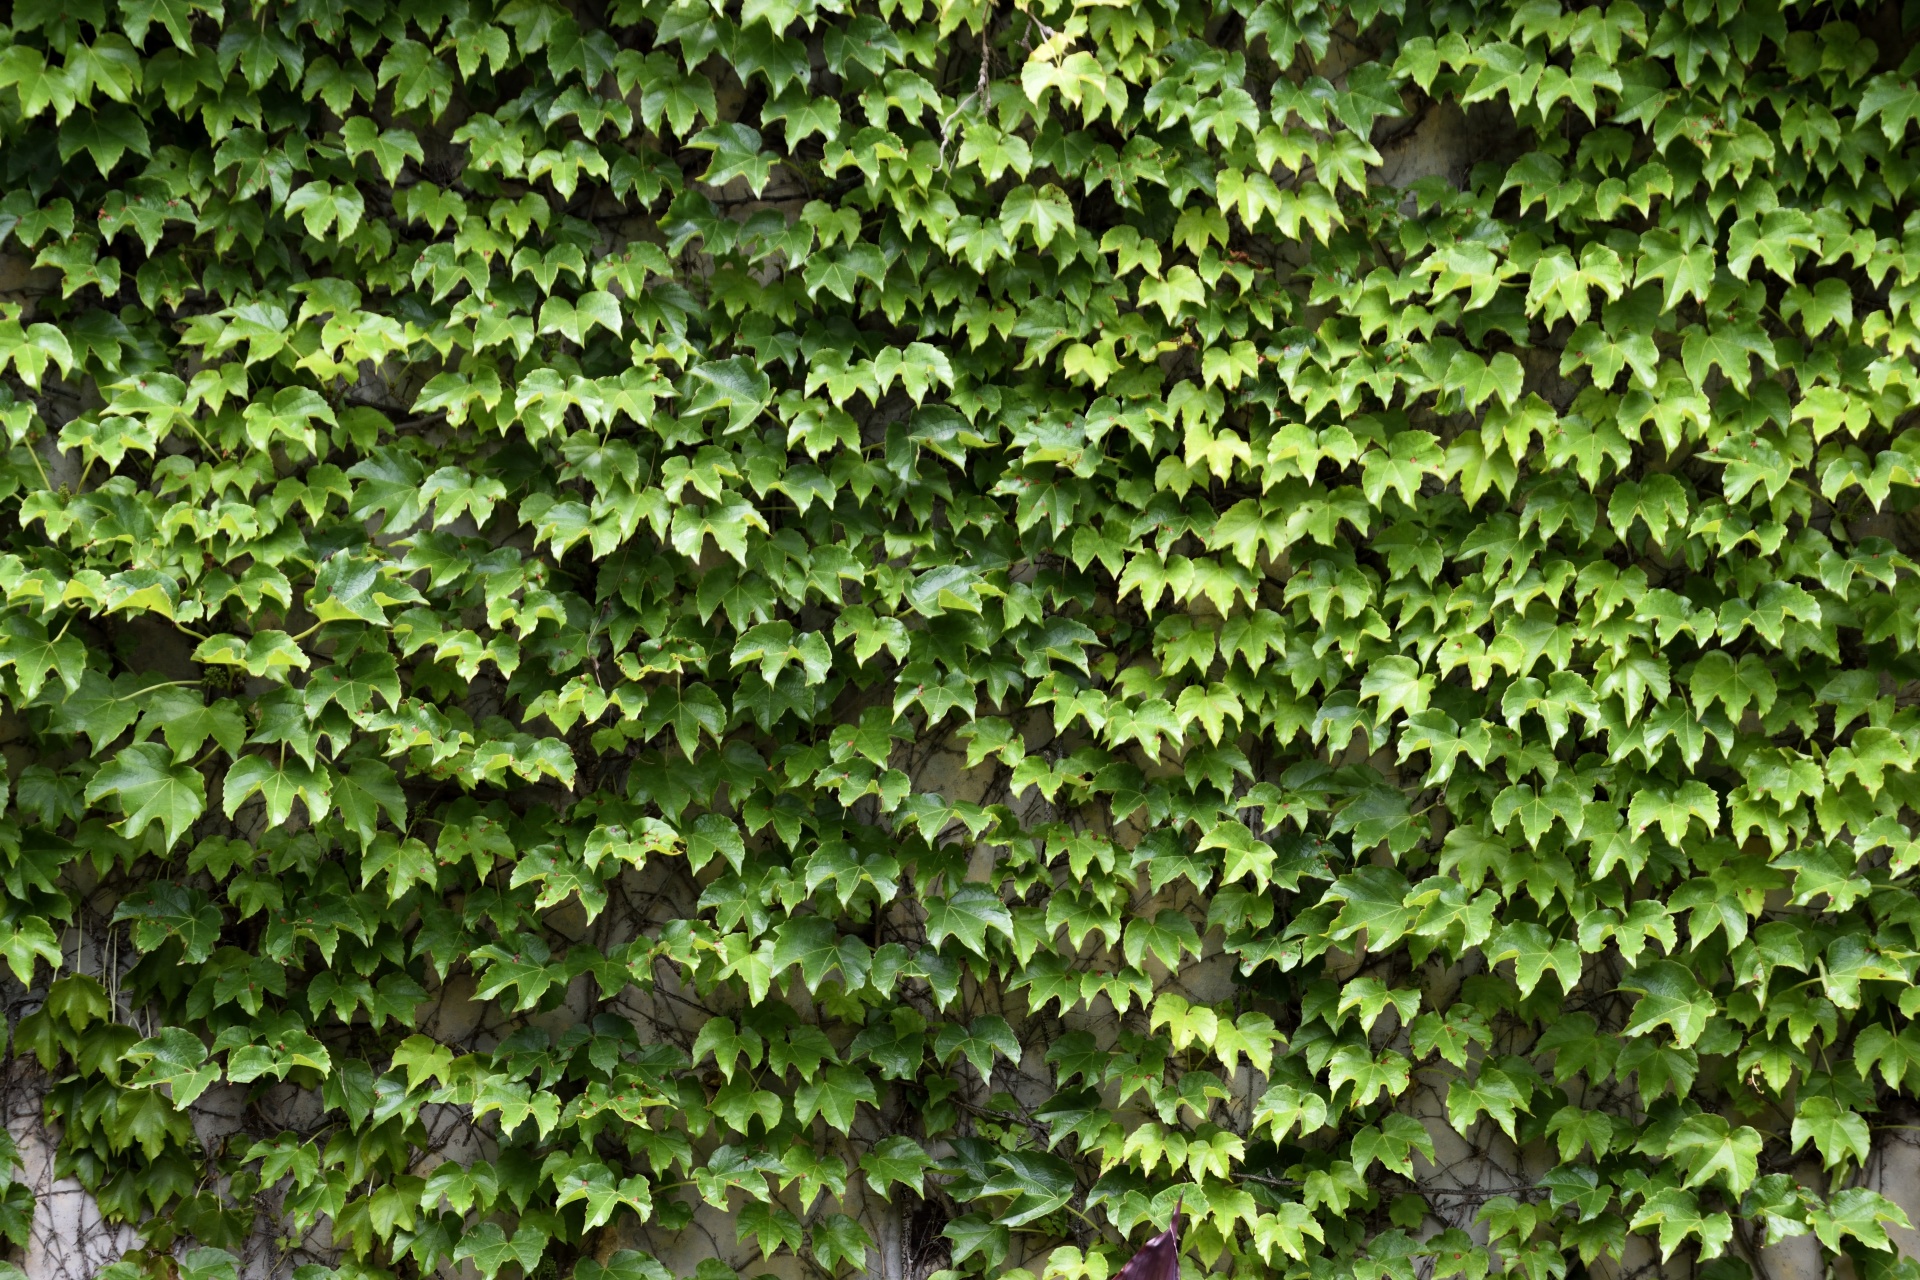 Green Ivy Vine growing on wall background